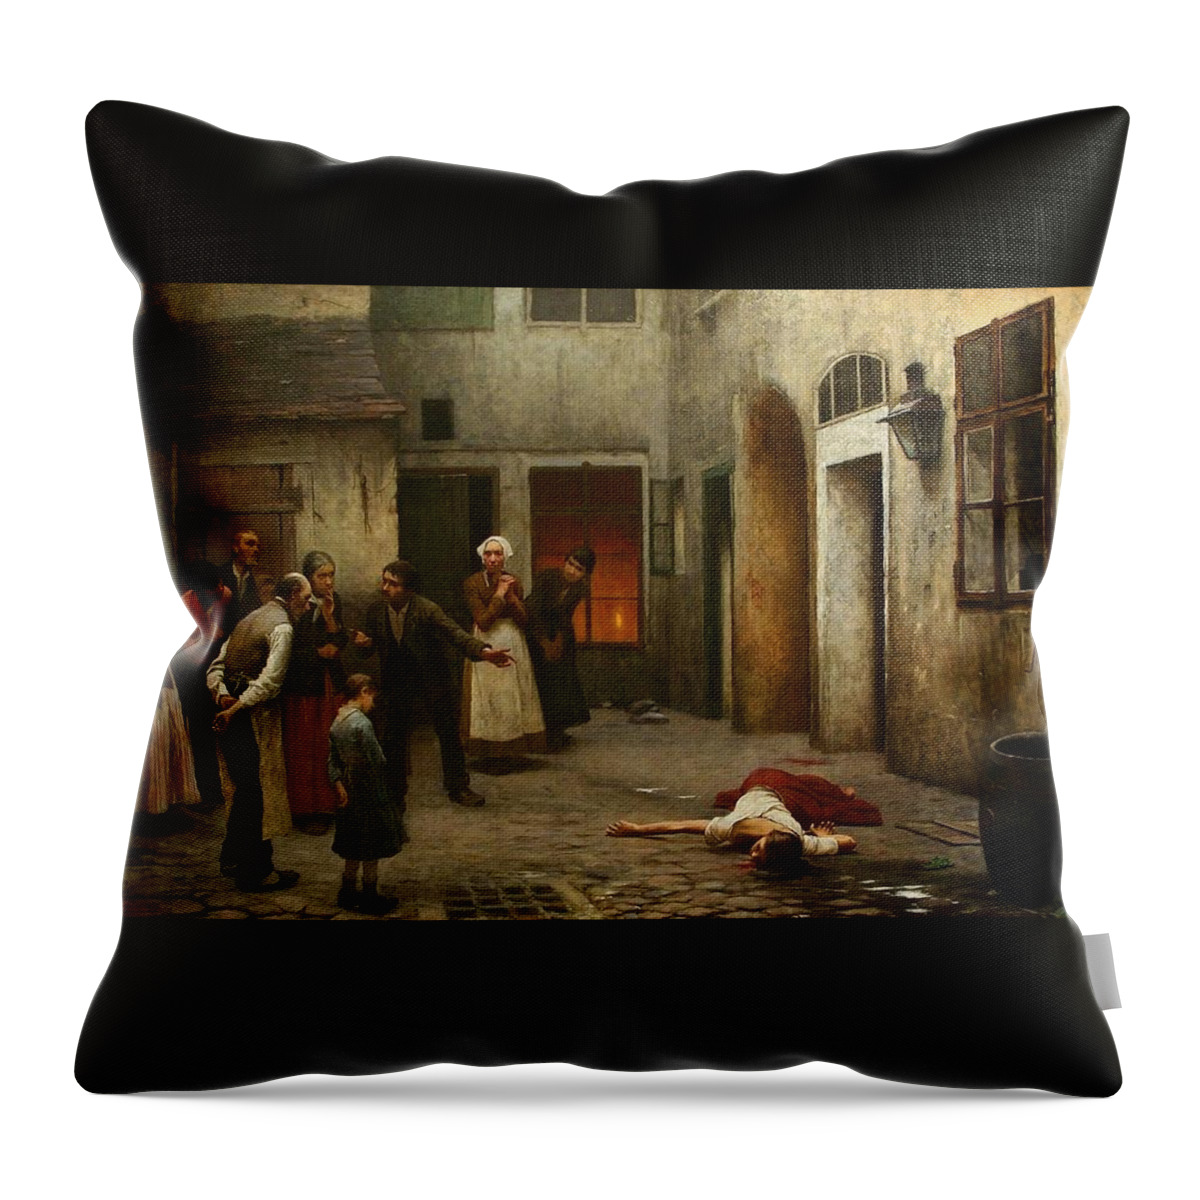 Jakub Schikaneder Throw Pillow featuring the painting Murder In The House #3 by MotionAge Designs